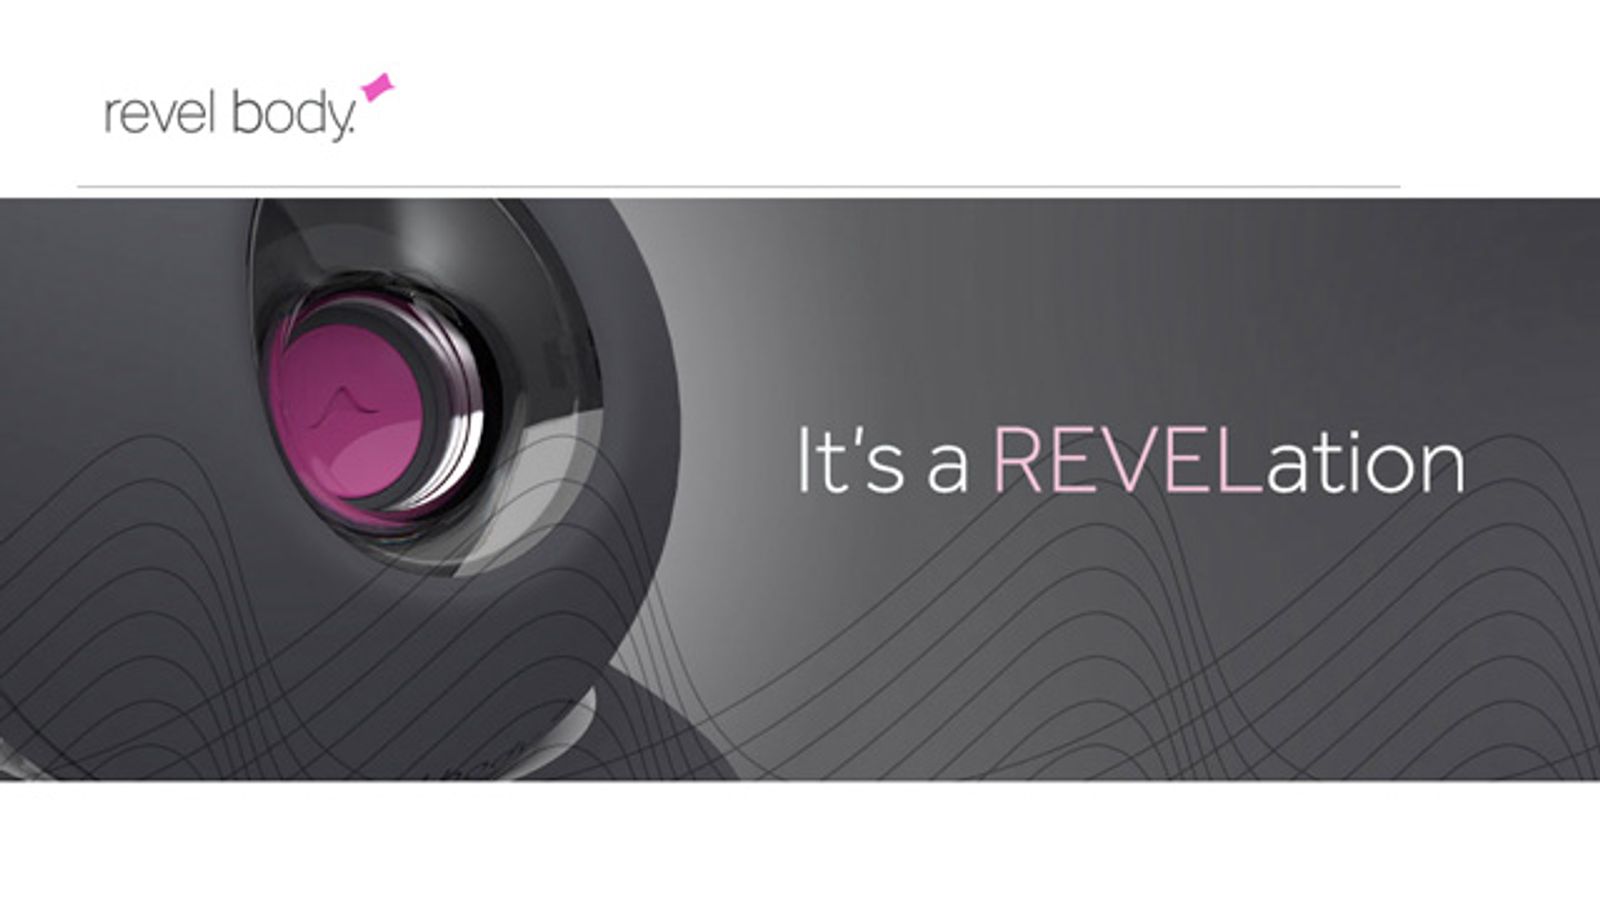 Revel Body Launches Indie-go-go Campaign For World’s 1st Sonic Vibrator